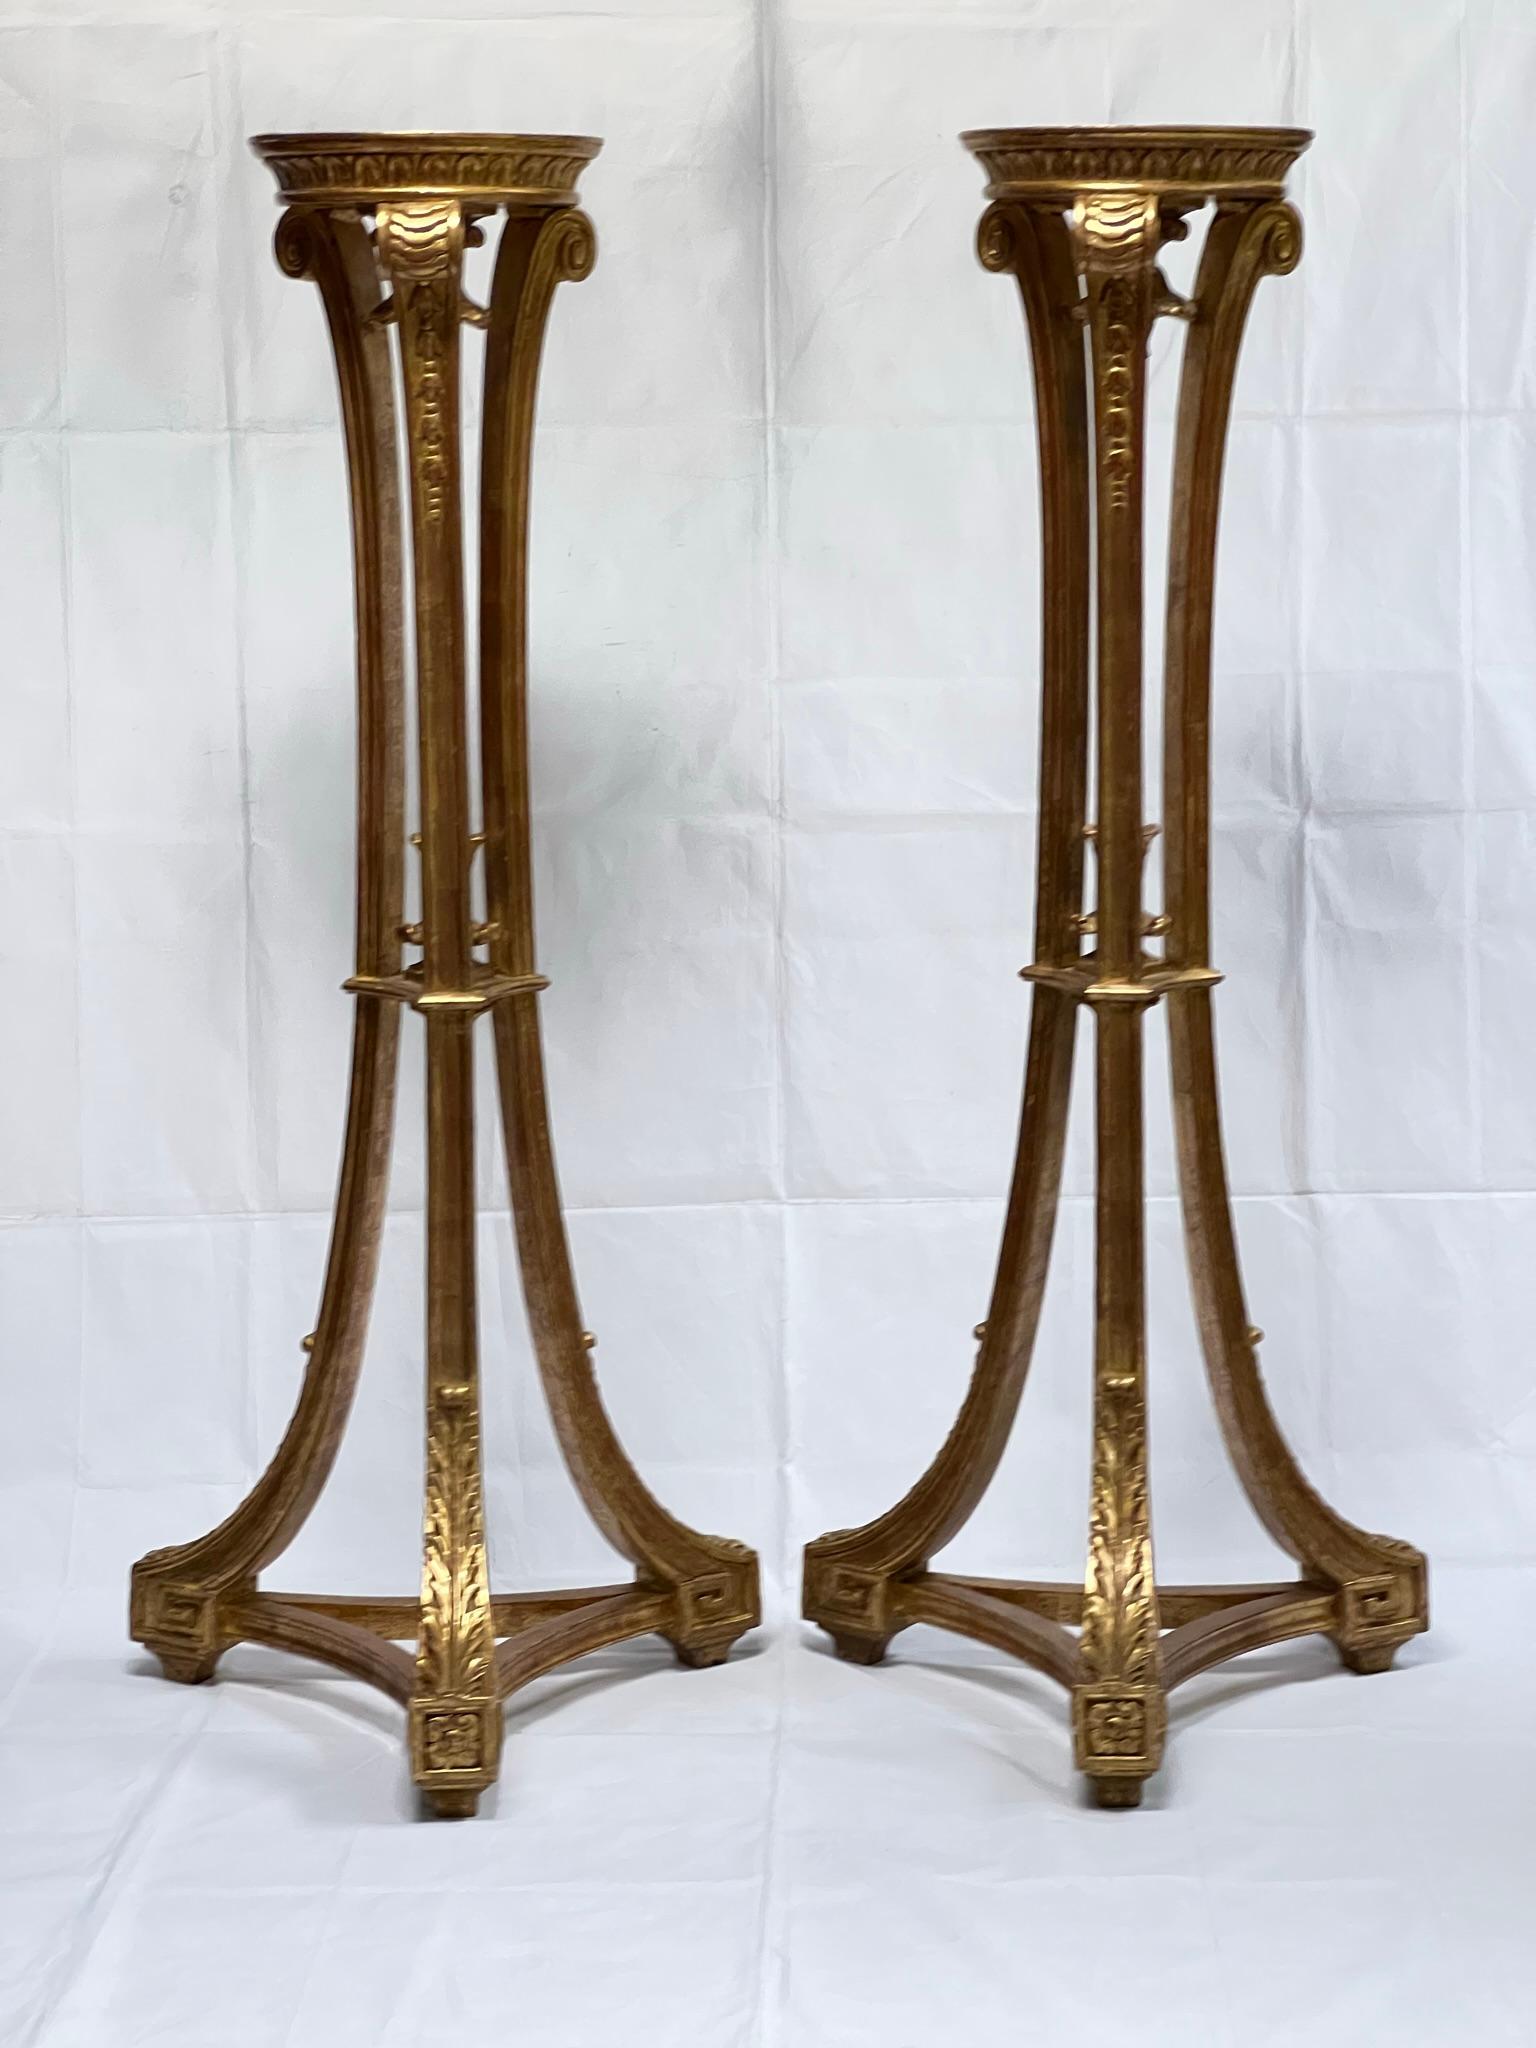 Pair of tall (47.5 inch) gilded wooden plant or candle stands with tripod base with neoclassical carved motifs including acanthus leaves, Greek keys and c-scrolls.  Circular tops measure 9 inches across.  